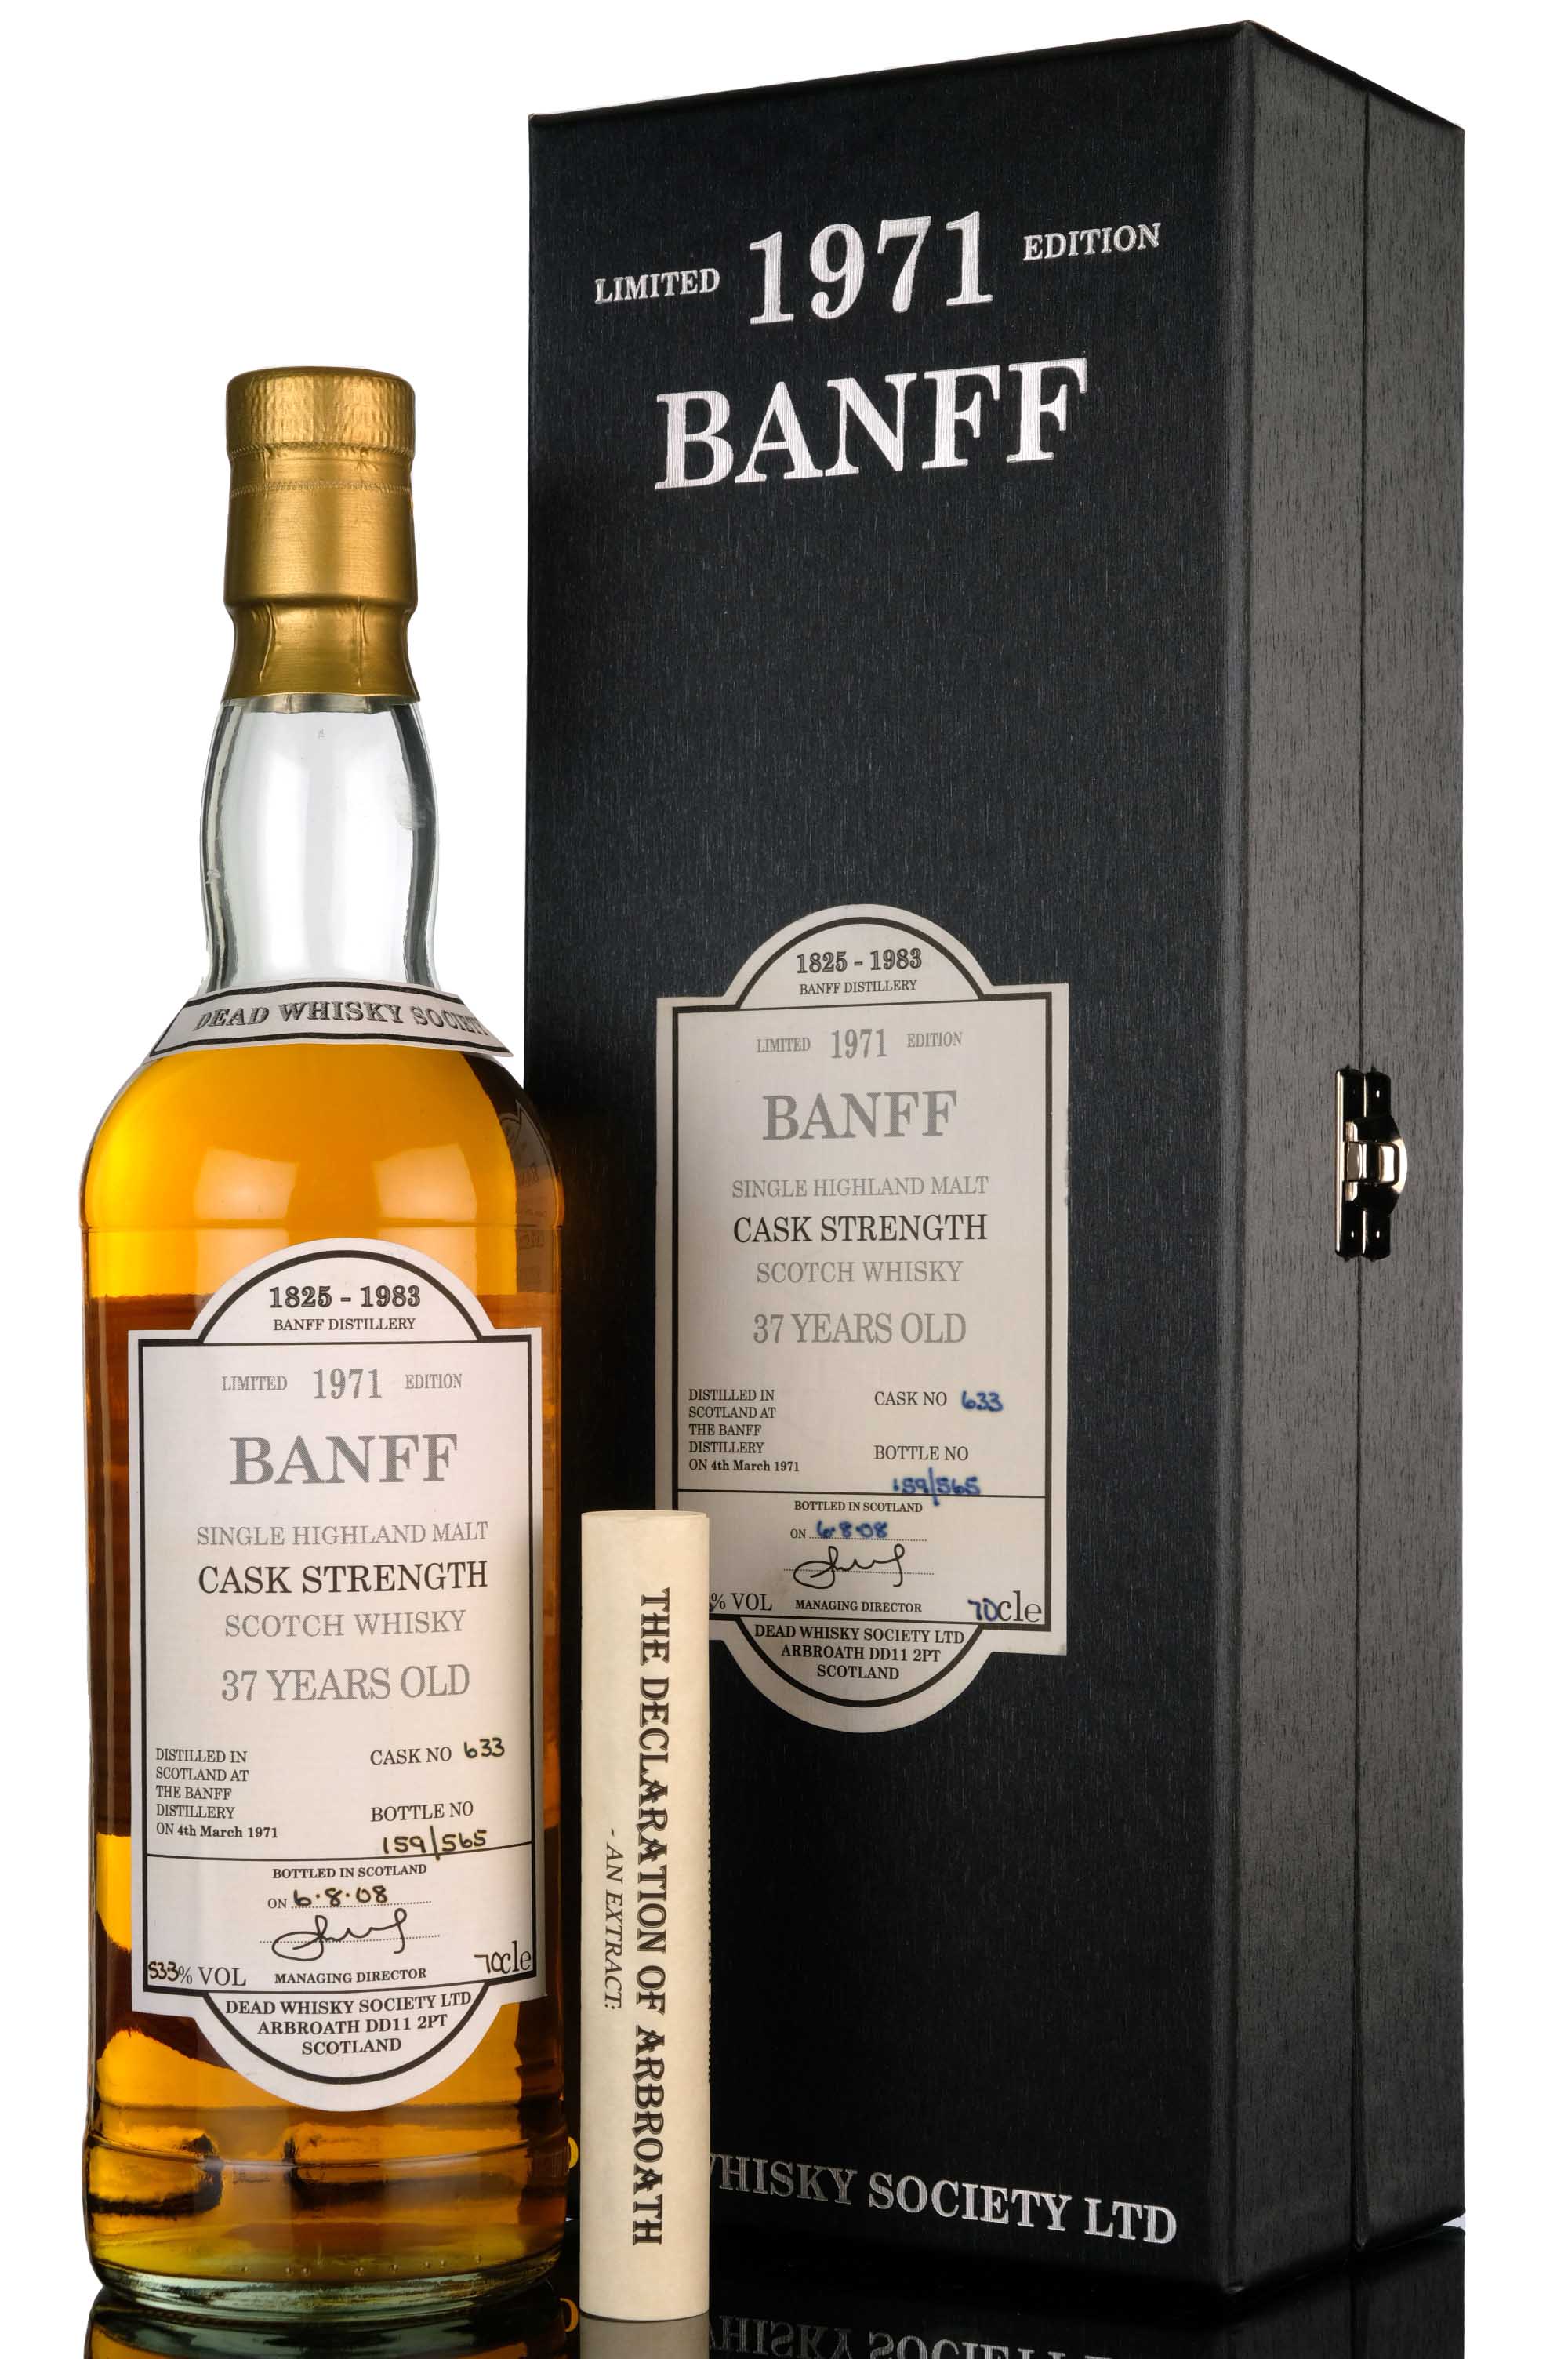 Banff 1971-2008 - 37 Year Old - Dead Whisky Society - Single Cask 633